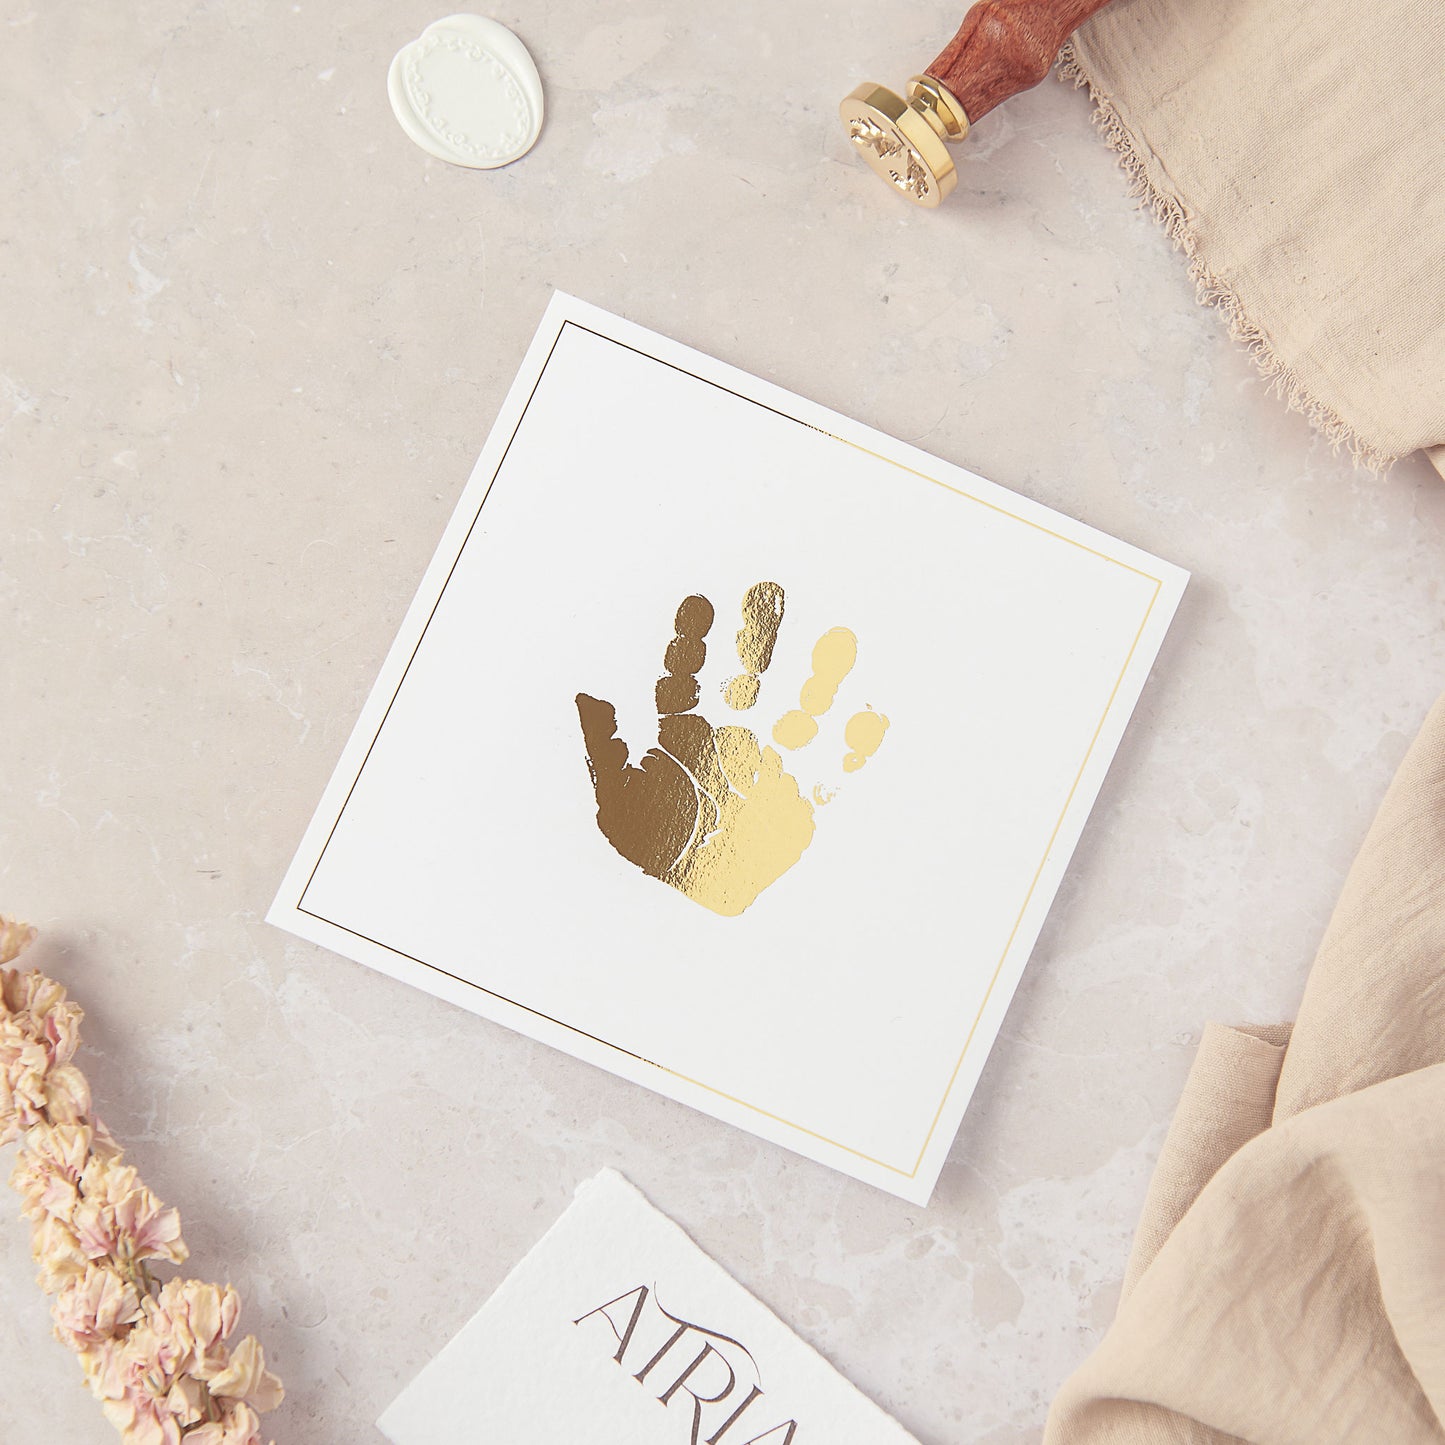 A flat lay photograph showing our 5 inch square personalised hand print keepsake. The Hand print keepsake is shown in Gold and white, where the baby's handprint is recreated to scale in metallic gold foil which is fused on to smooth white cardstock centrally. The personalised hand print keepsake is unframed and is shown resting on a light pink marble style back drop. Fabric, wax stamp seals, a floral stem and Atria UK branded card surrounds the keepsake to decorate the edges of the photograph.